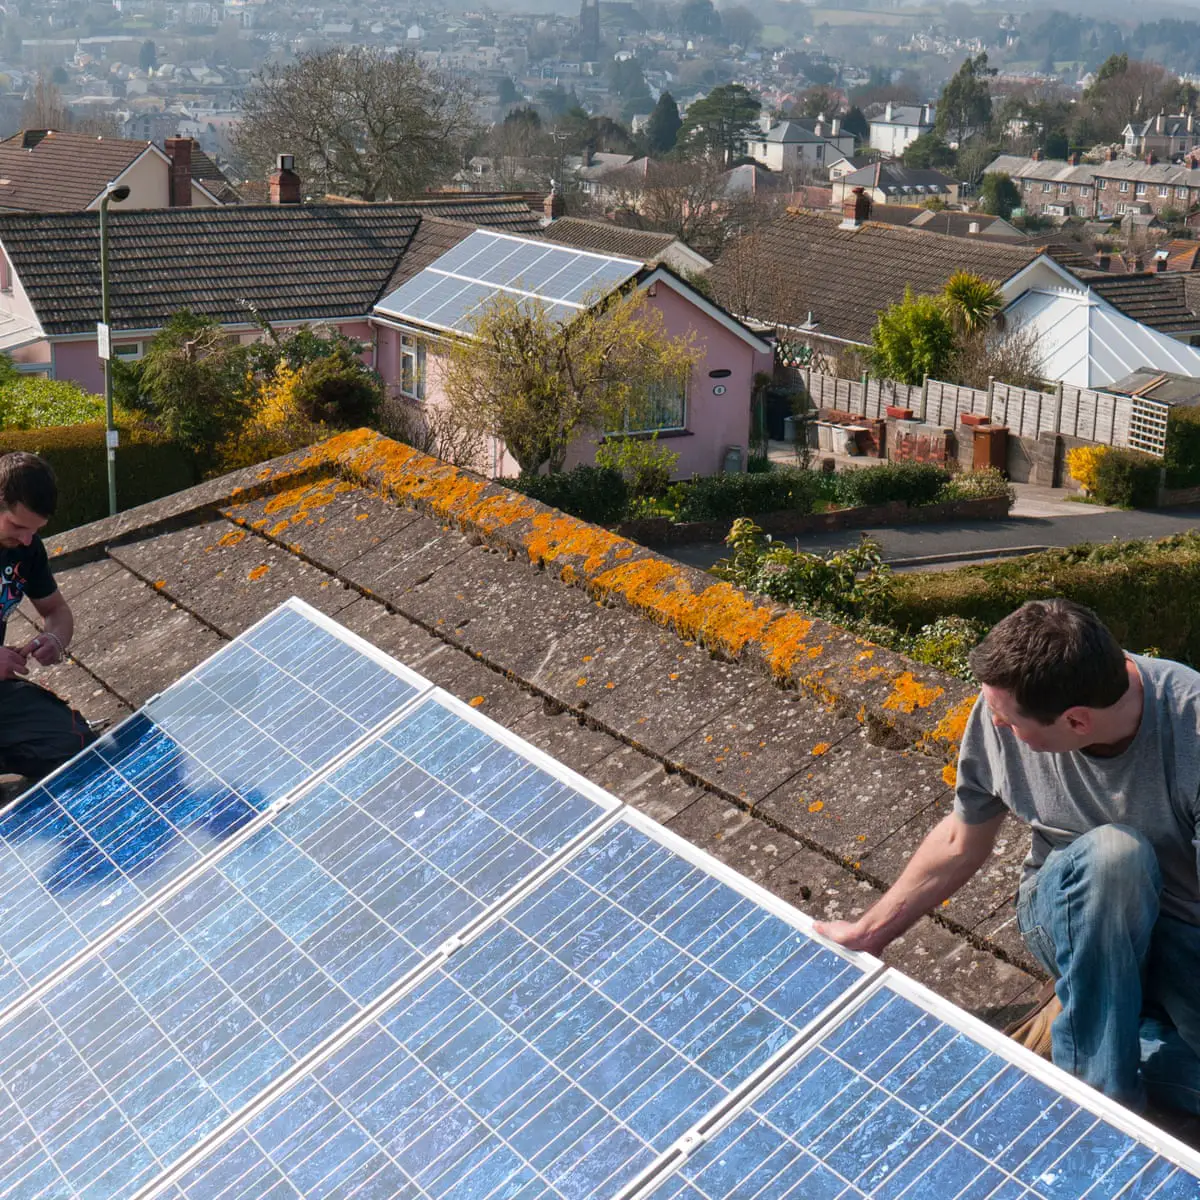 Uk Free Solar Panels From The Government : Uk Installs 175mw Solar Pv ...